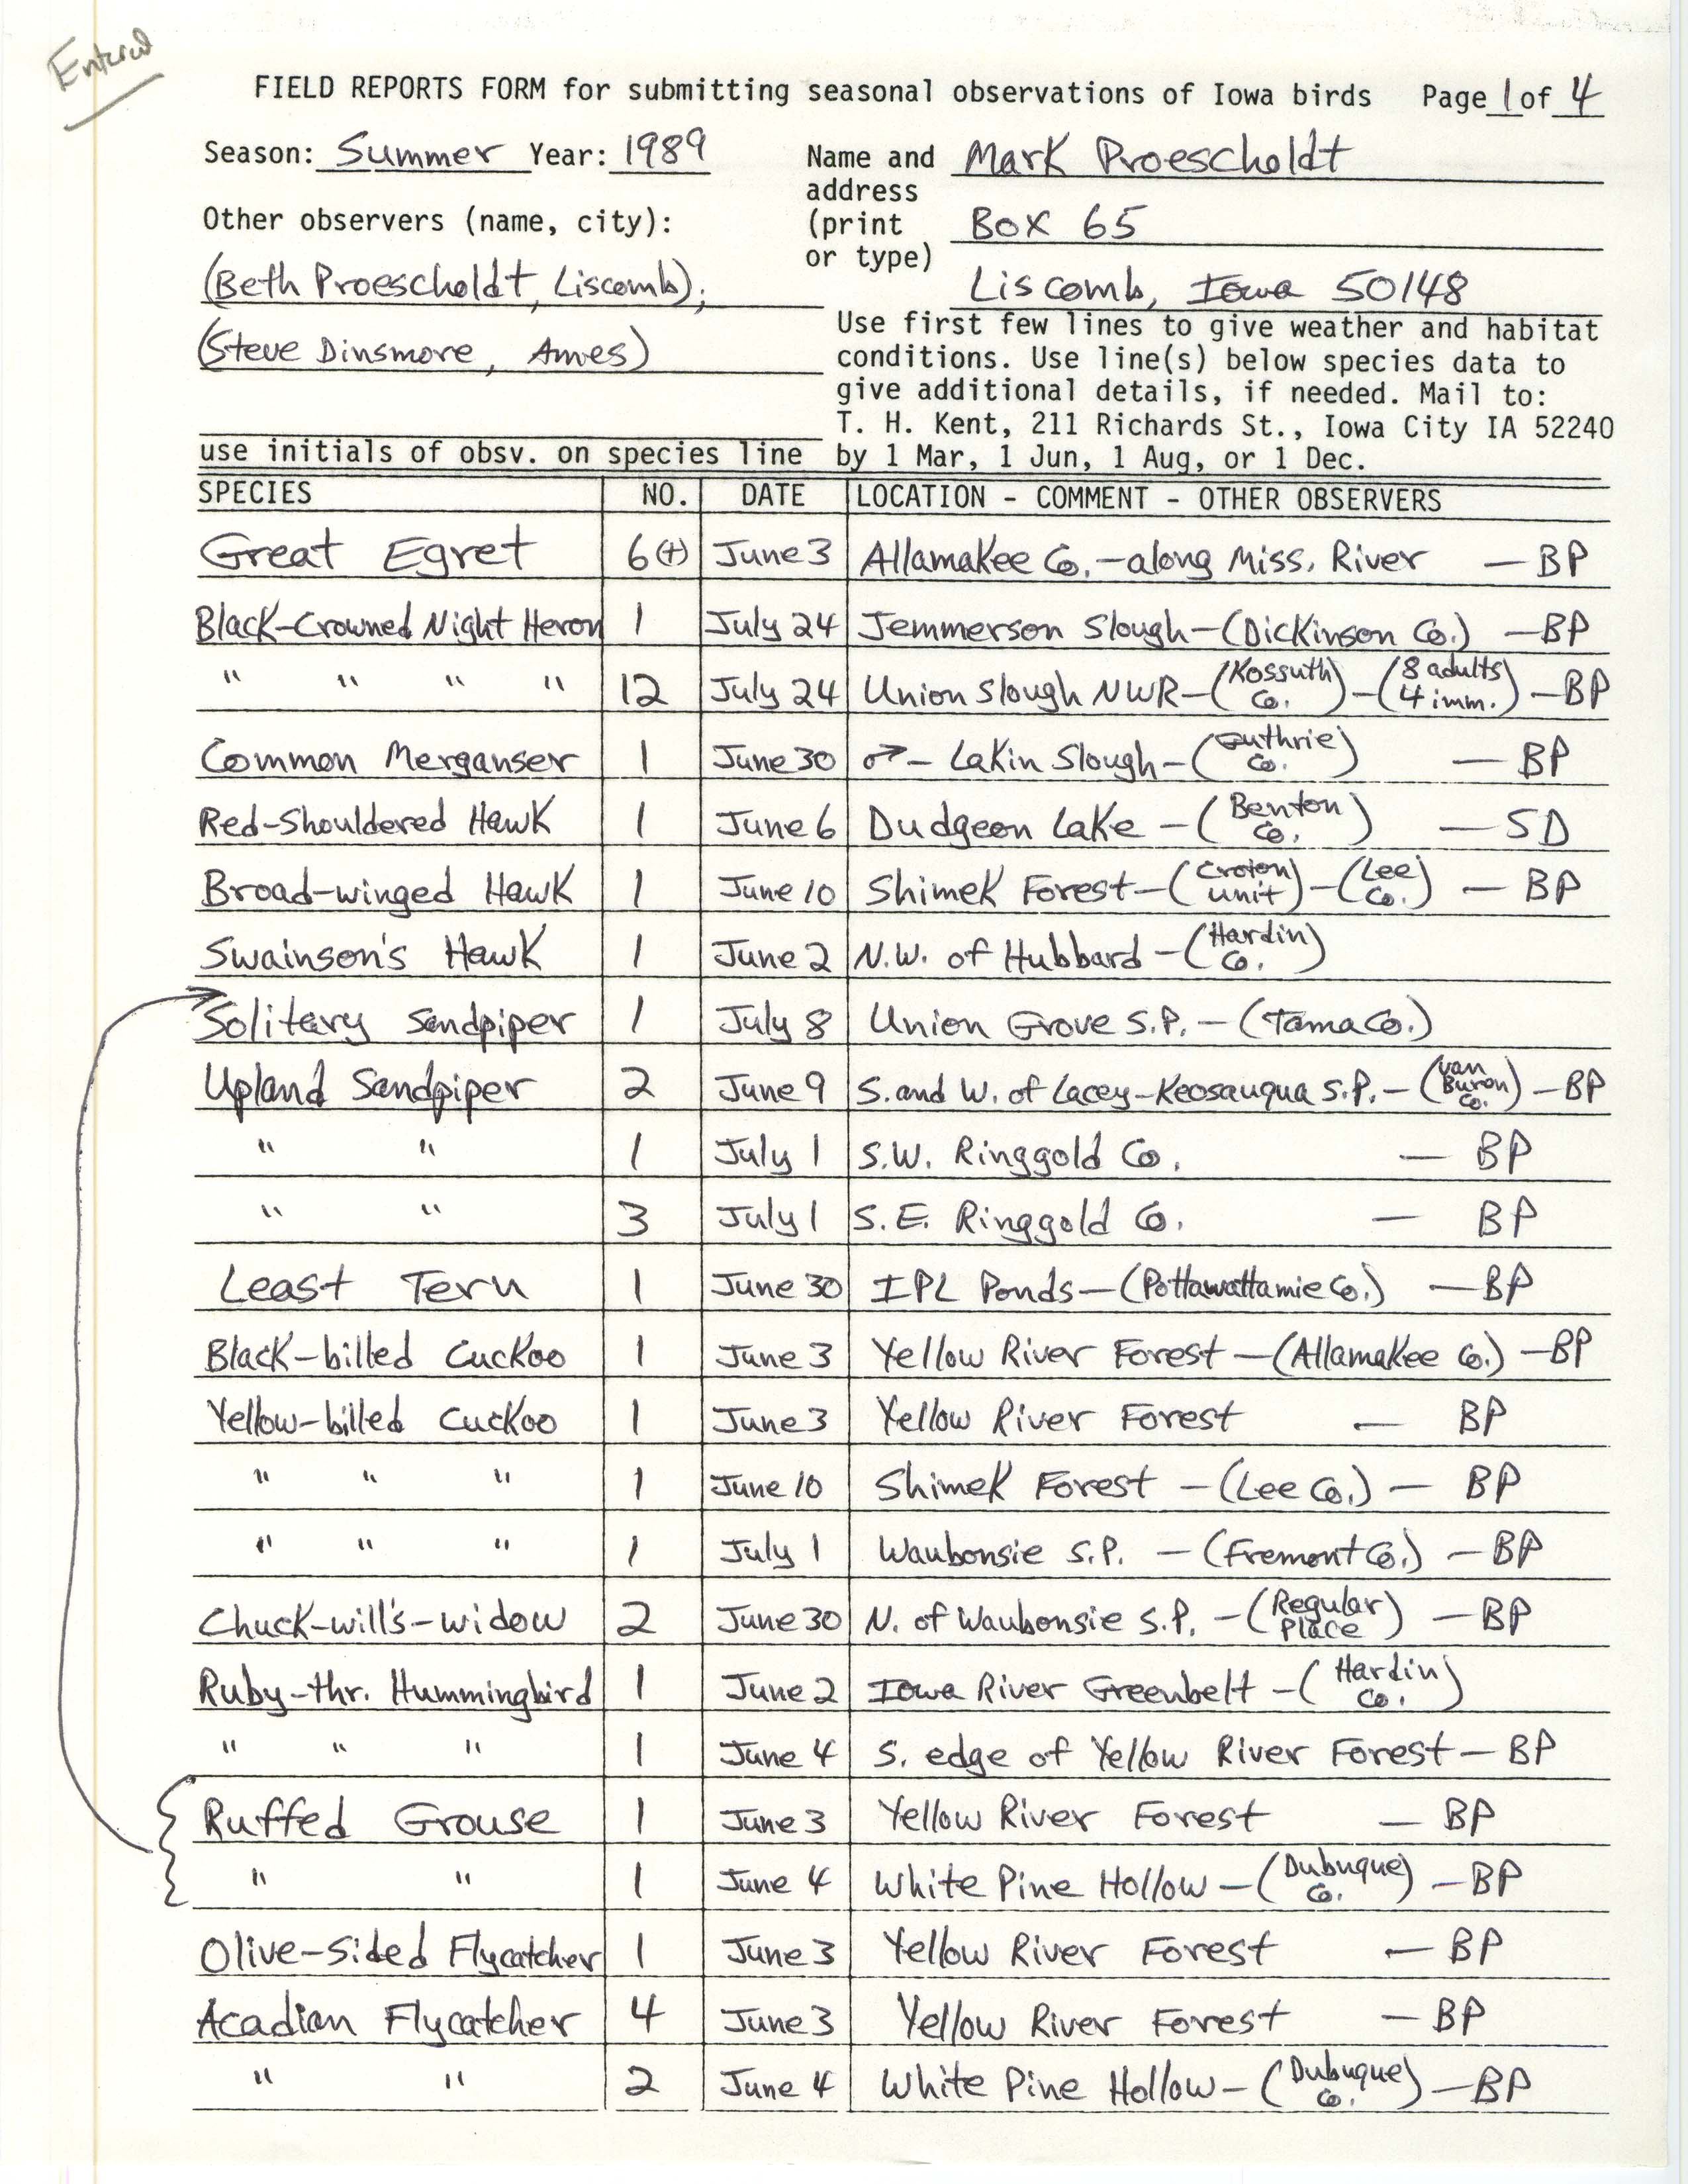 Field reports form for submitting seasonal observations of Iowa birds, Mark Proescholdt, summer 1989